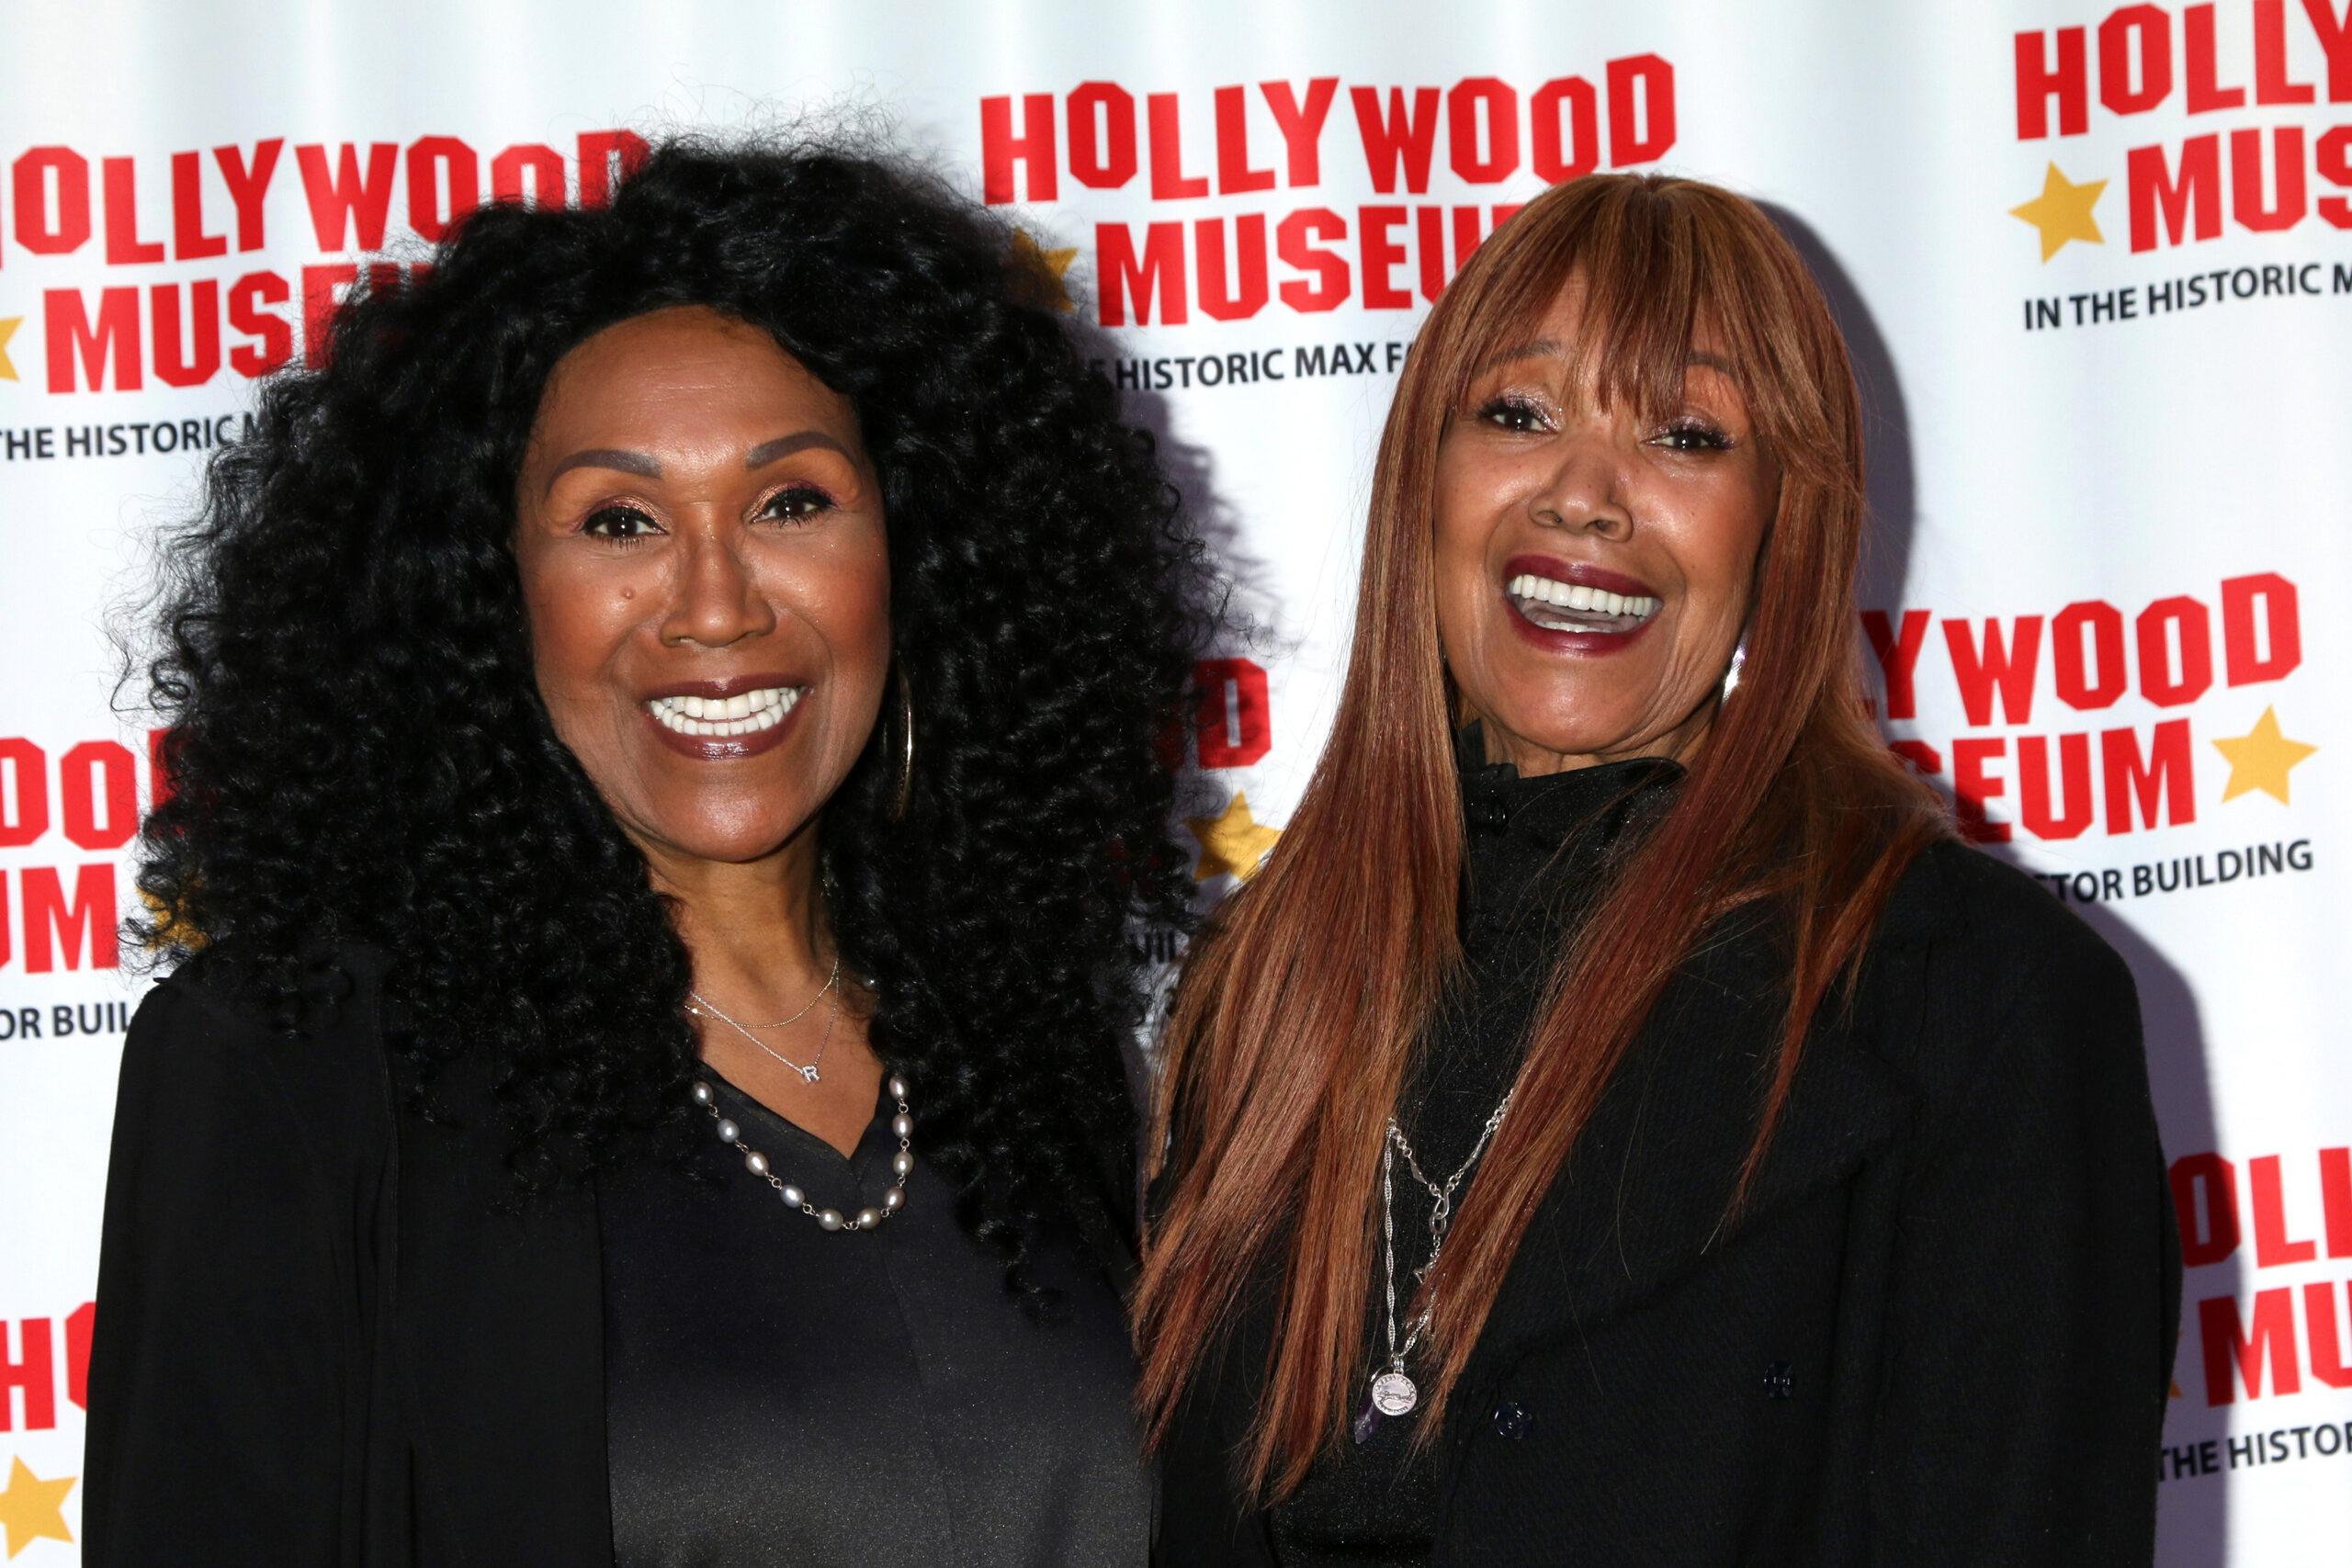 LOS ANGELES - May 28: Ruth Pointer and Anita Pointer at the Hollywood Museum Re-Opens with Ruta Lee's Consider Your A** Kissed Event at the Hollywood Museum on May 28, 2021 in Los Angeles, CA Newscom/(Mega Agency TagID: khphotos793499.jpg) [Photo via Mega Agency]